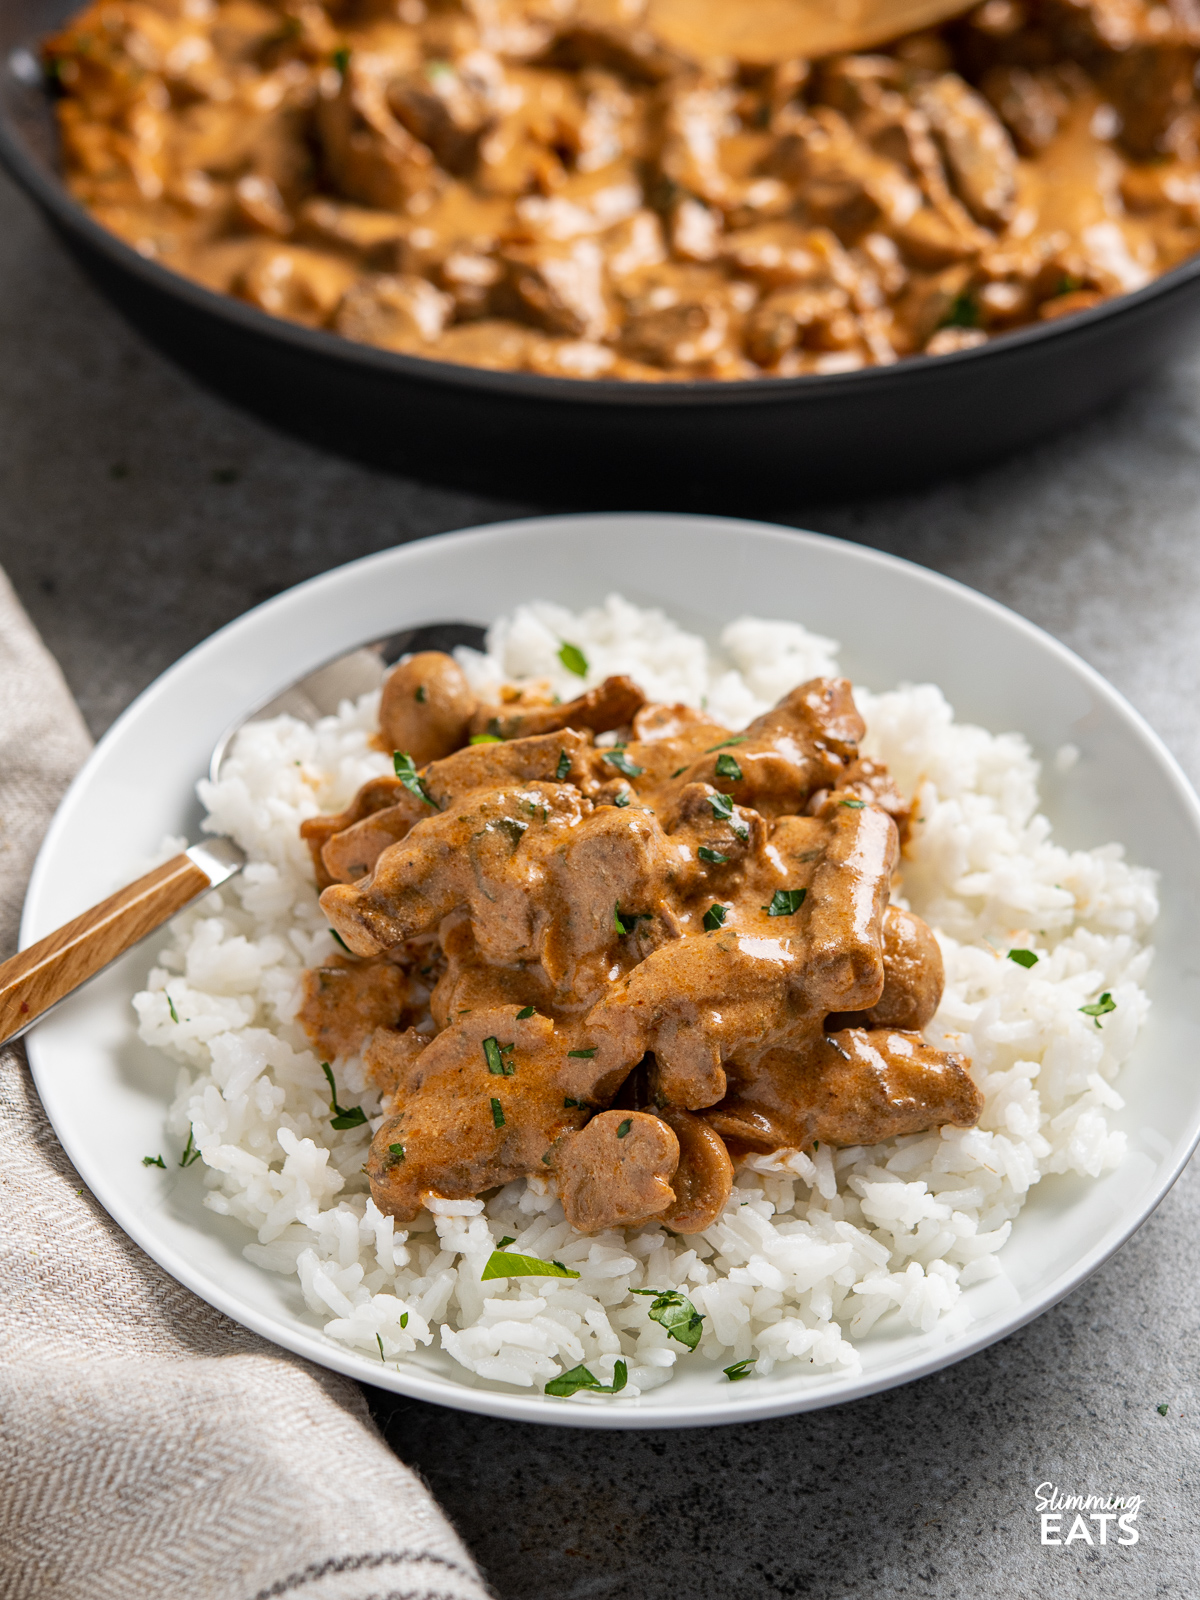 Beef Stroganoff in white bowl with rice, frying pan in background